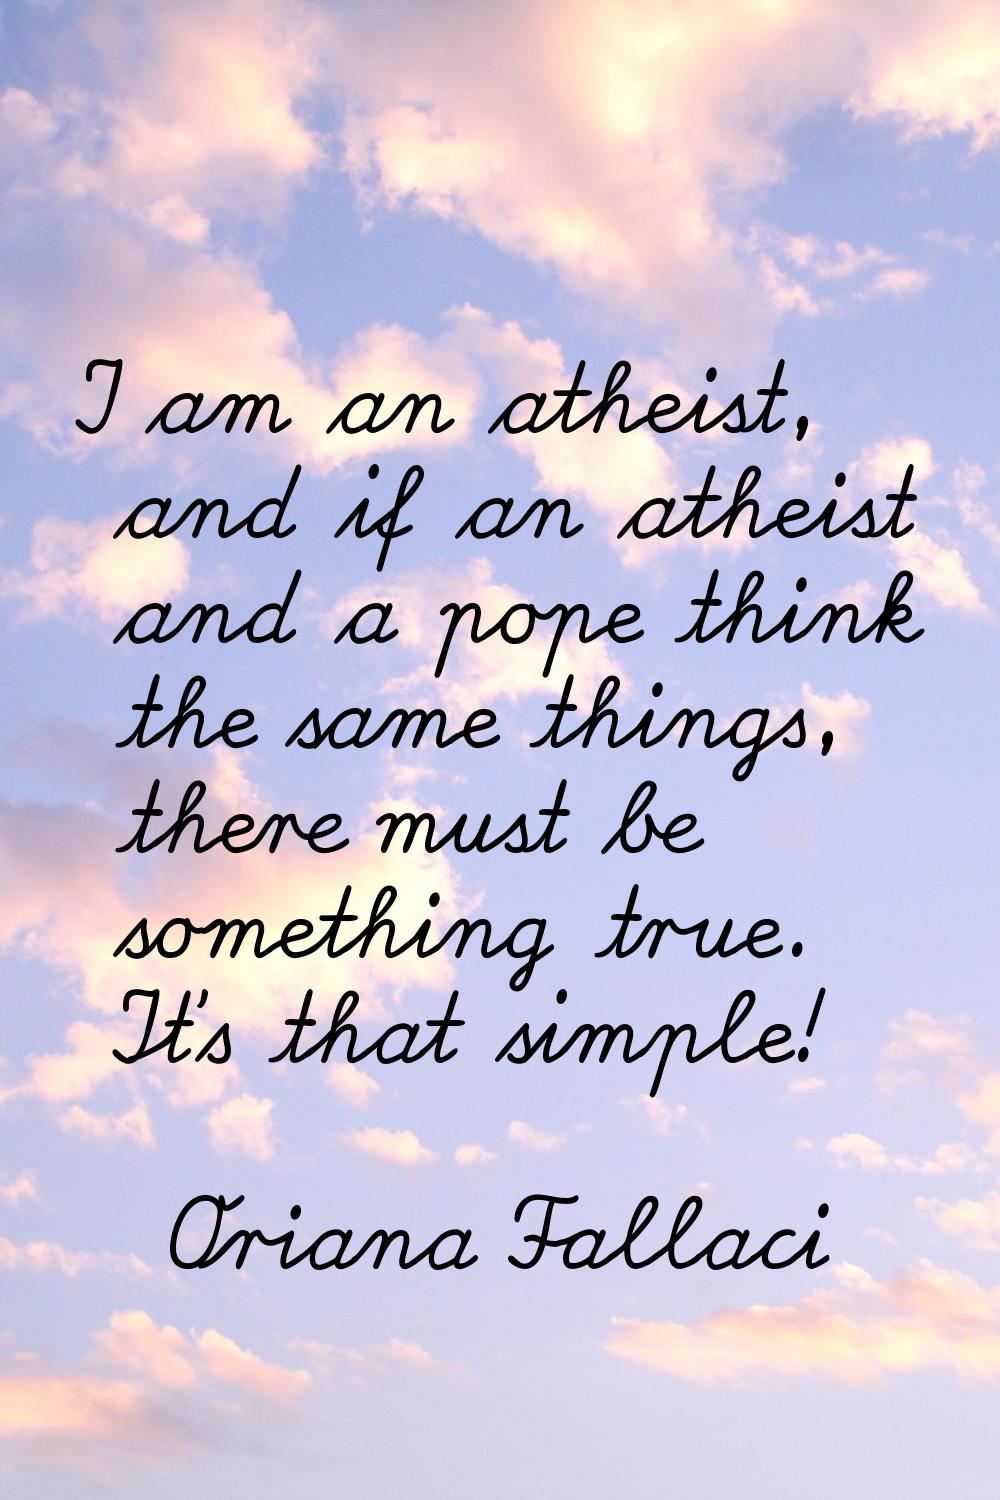 I am an atheist, and if an atheist and a pope think the same things, there must be something true. 